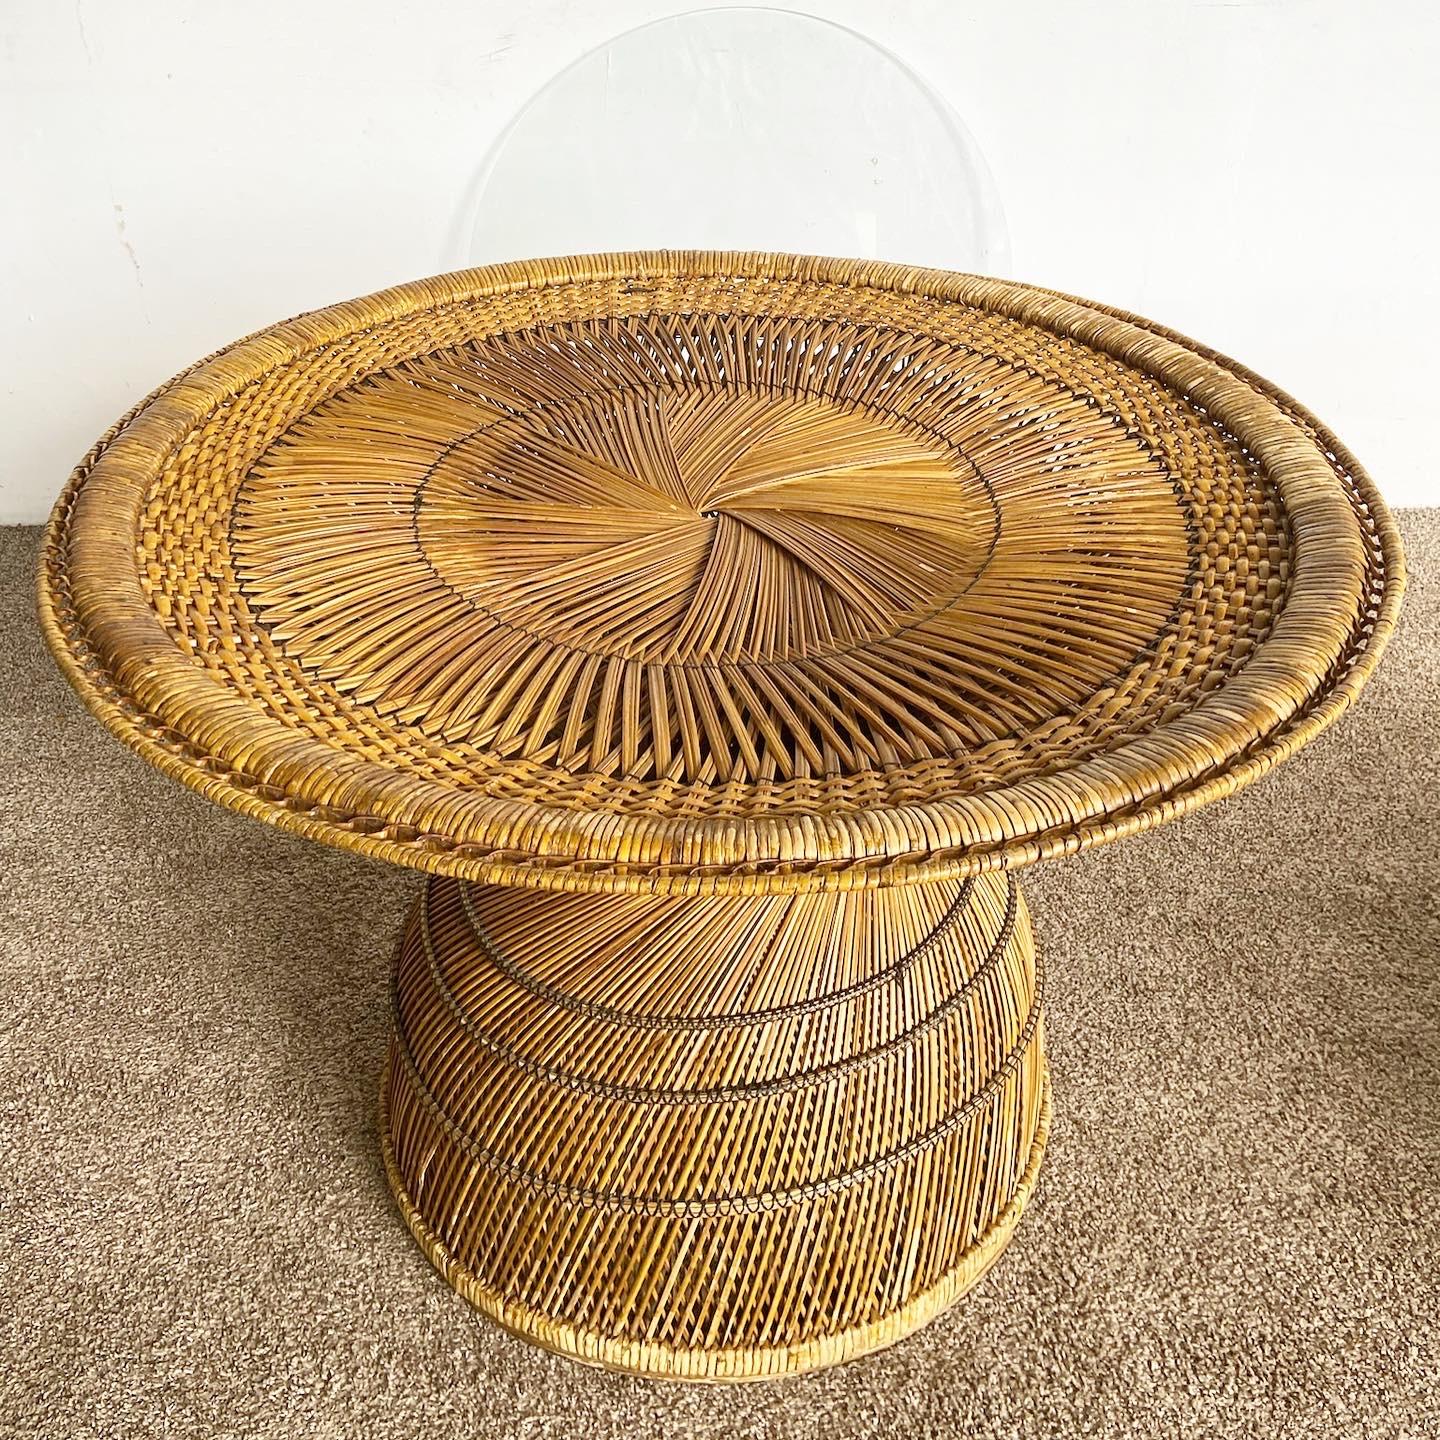 Elevate your dining area with the amazing vintage hourglass-shaped buri rattan dining table. This table features a fantastic circular weave design and an inlaid glass top, adding a touch of boho chic charm to your space.

Amazing vintage